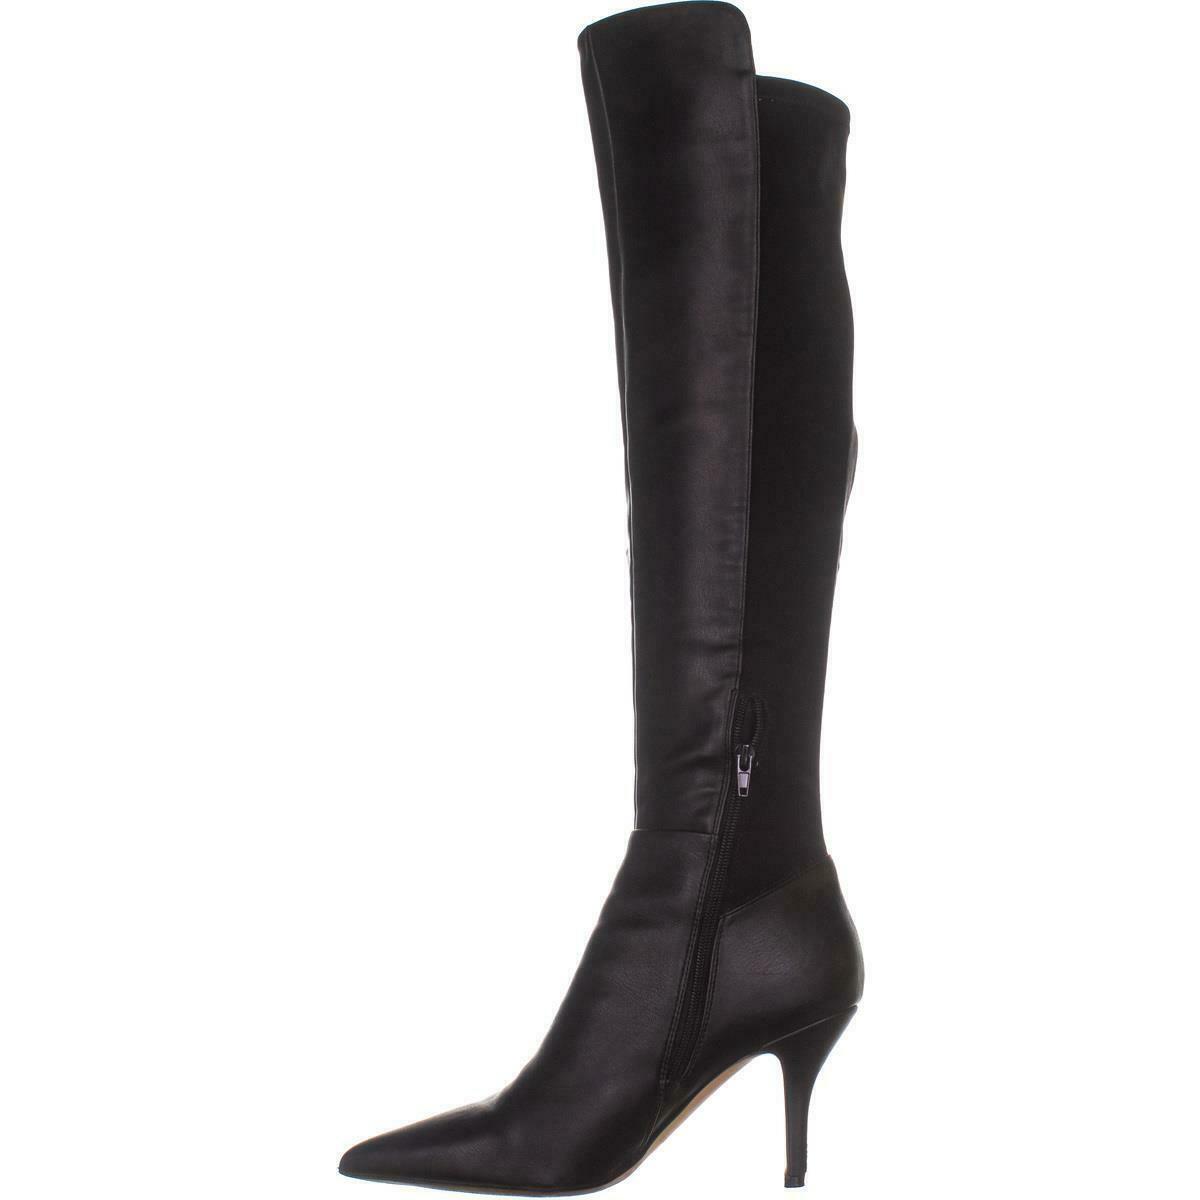 Marc Fisher Thora Pointed Toe Knee High Boots 275, Black Multi, 10 US ...